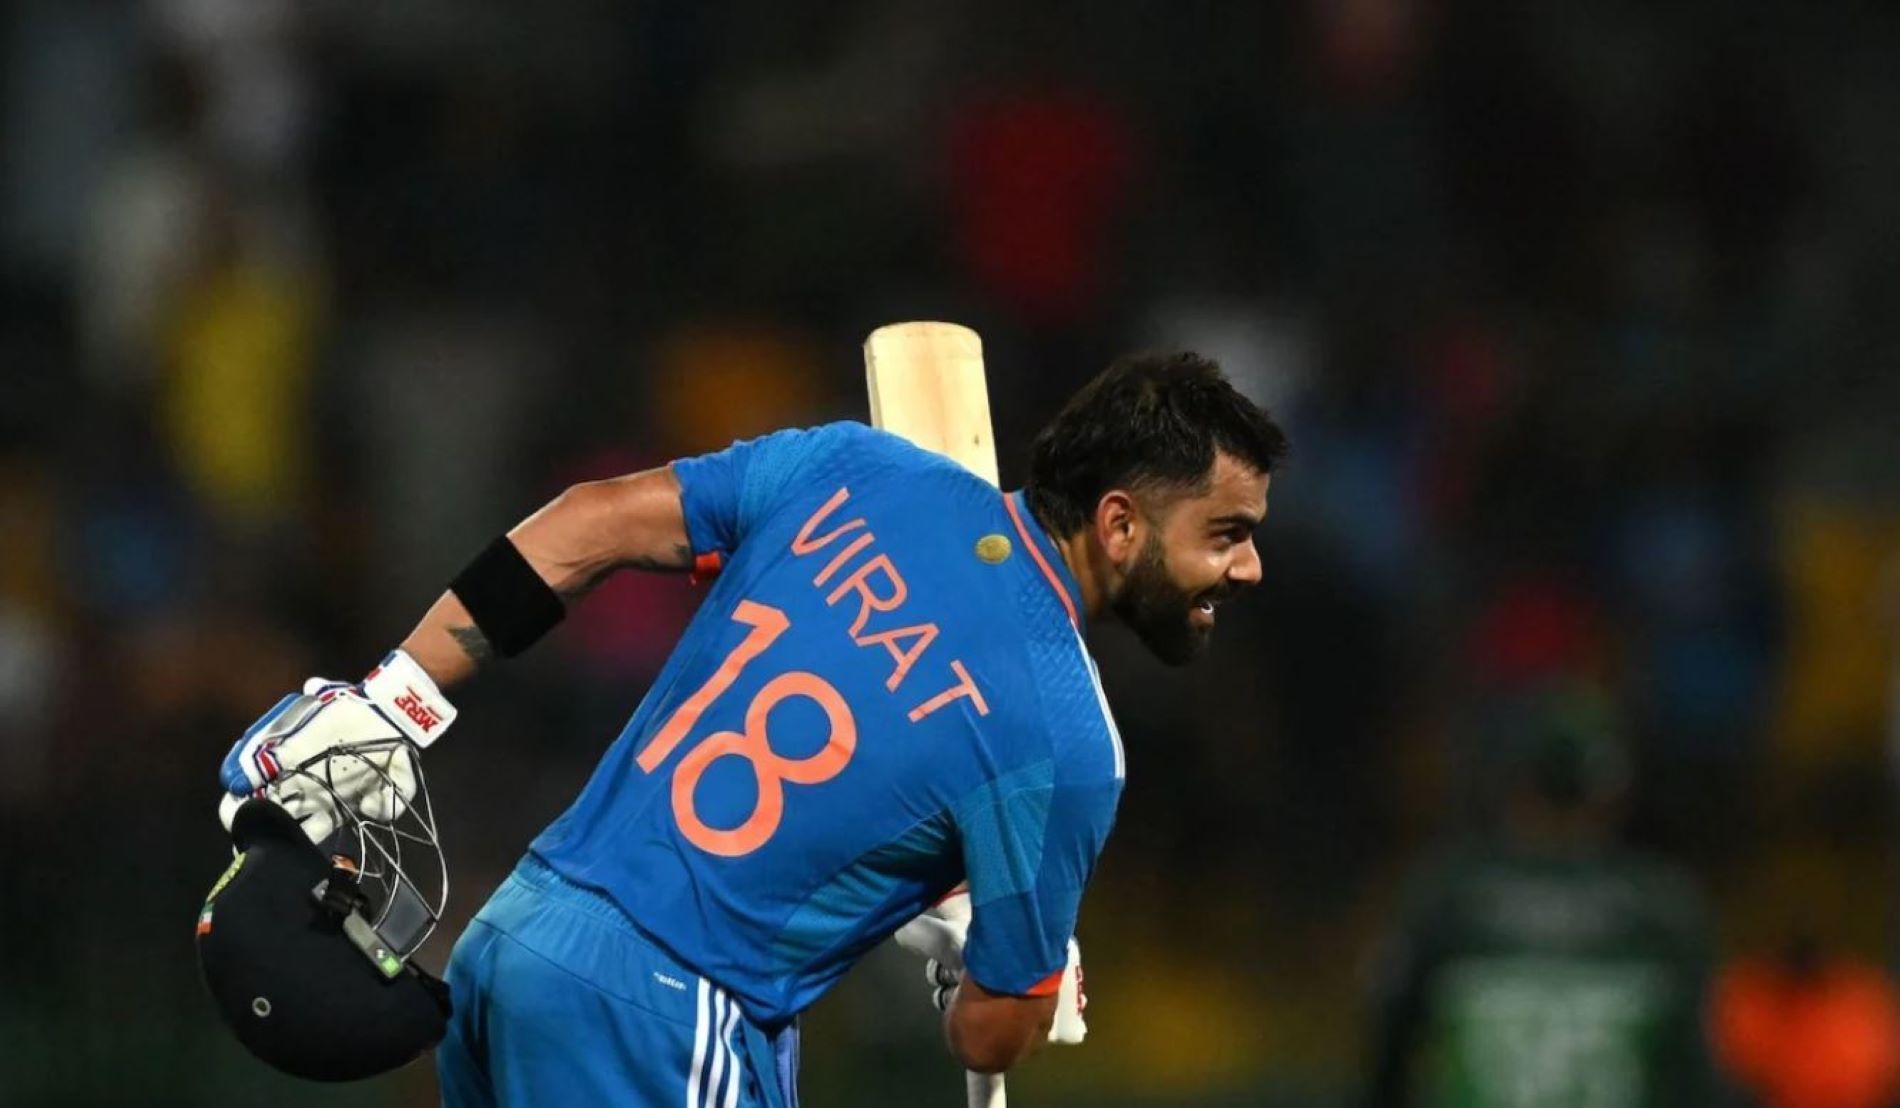 Kohli toyed with the Pakistan bowlers during the final overs of the innings